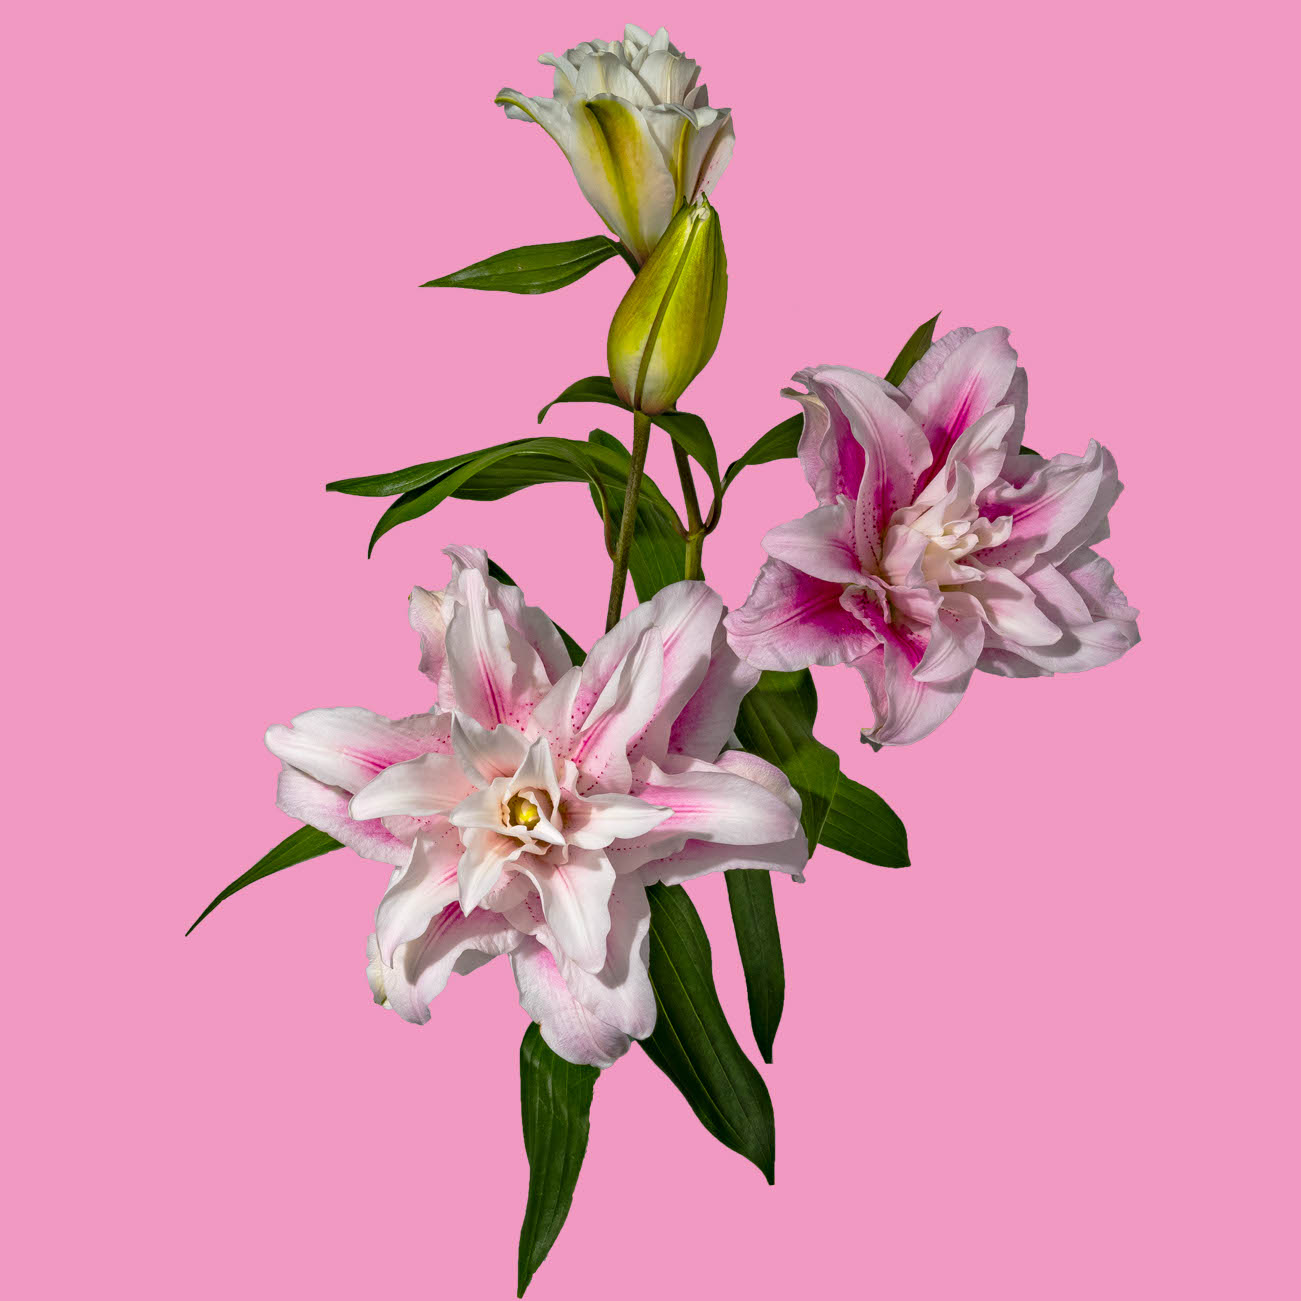 Rose Lilies